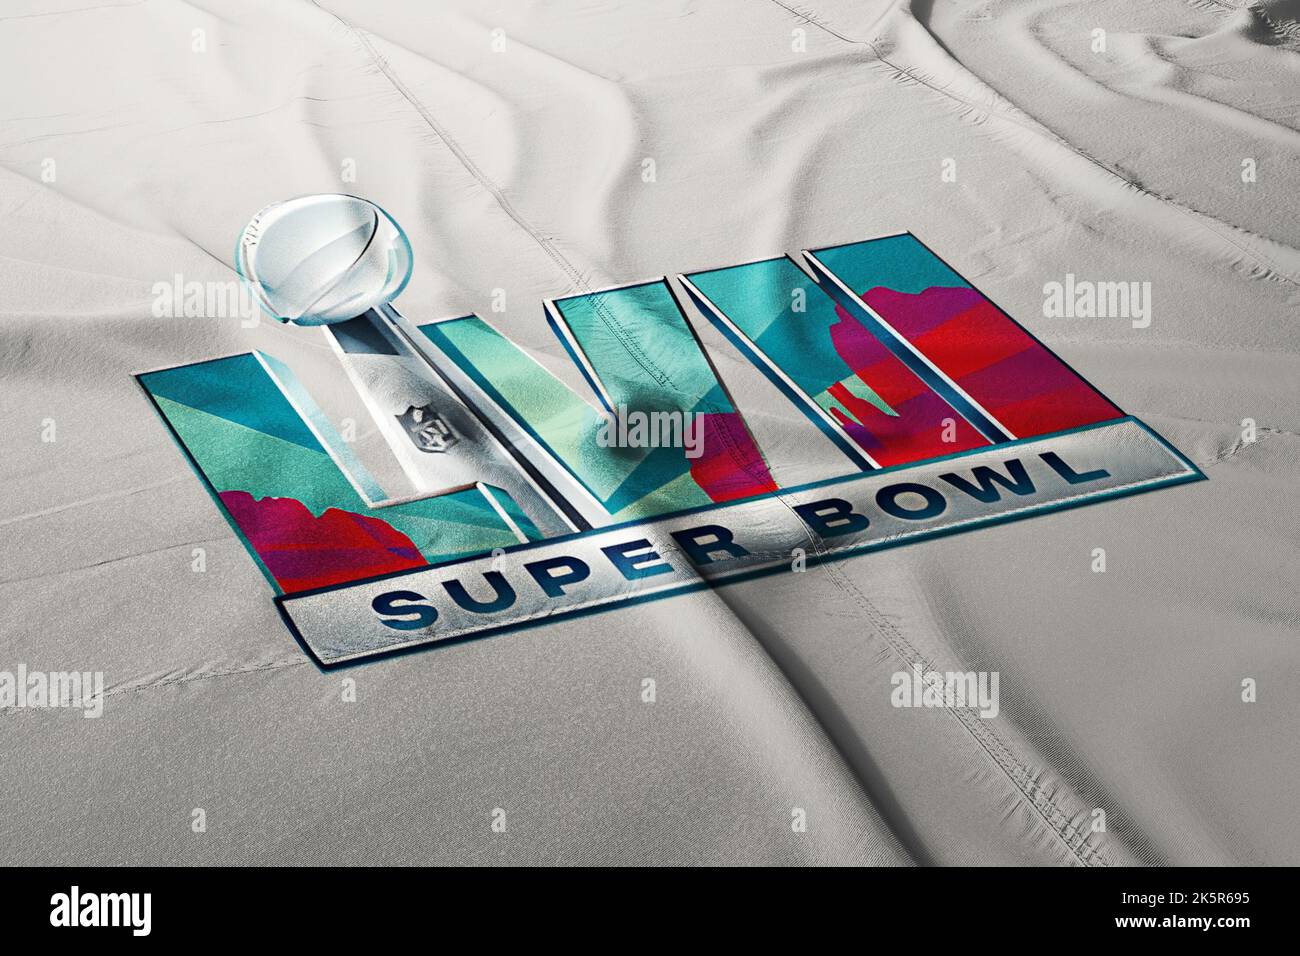 Illustration for the coming super bowl lvii event 2023 national football league, Stock Photo